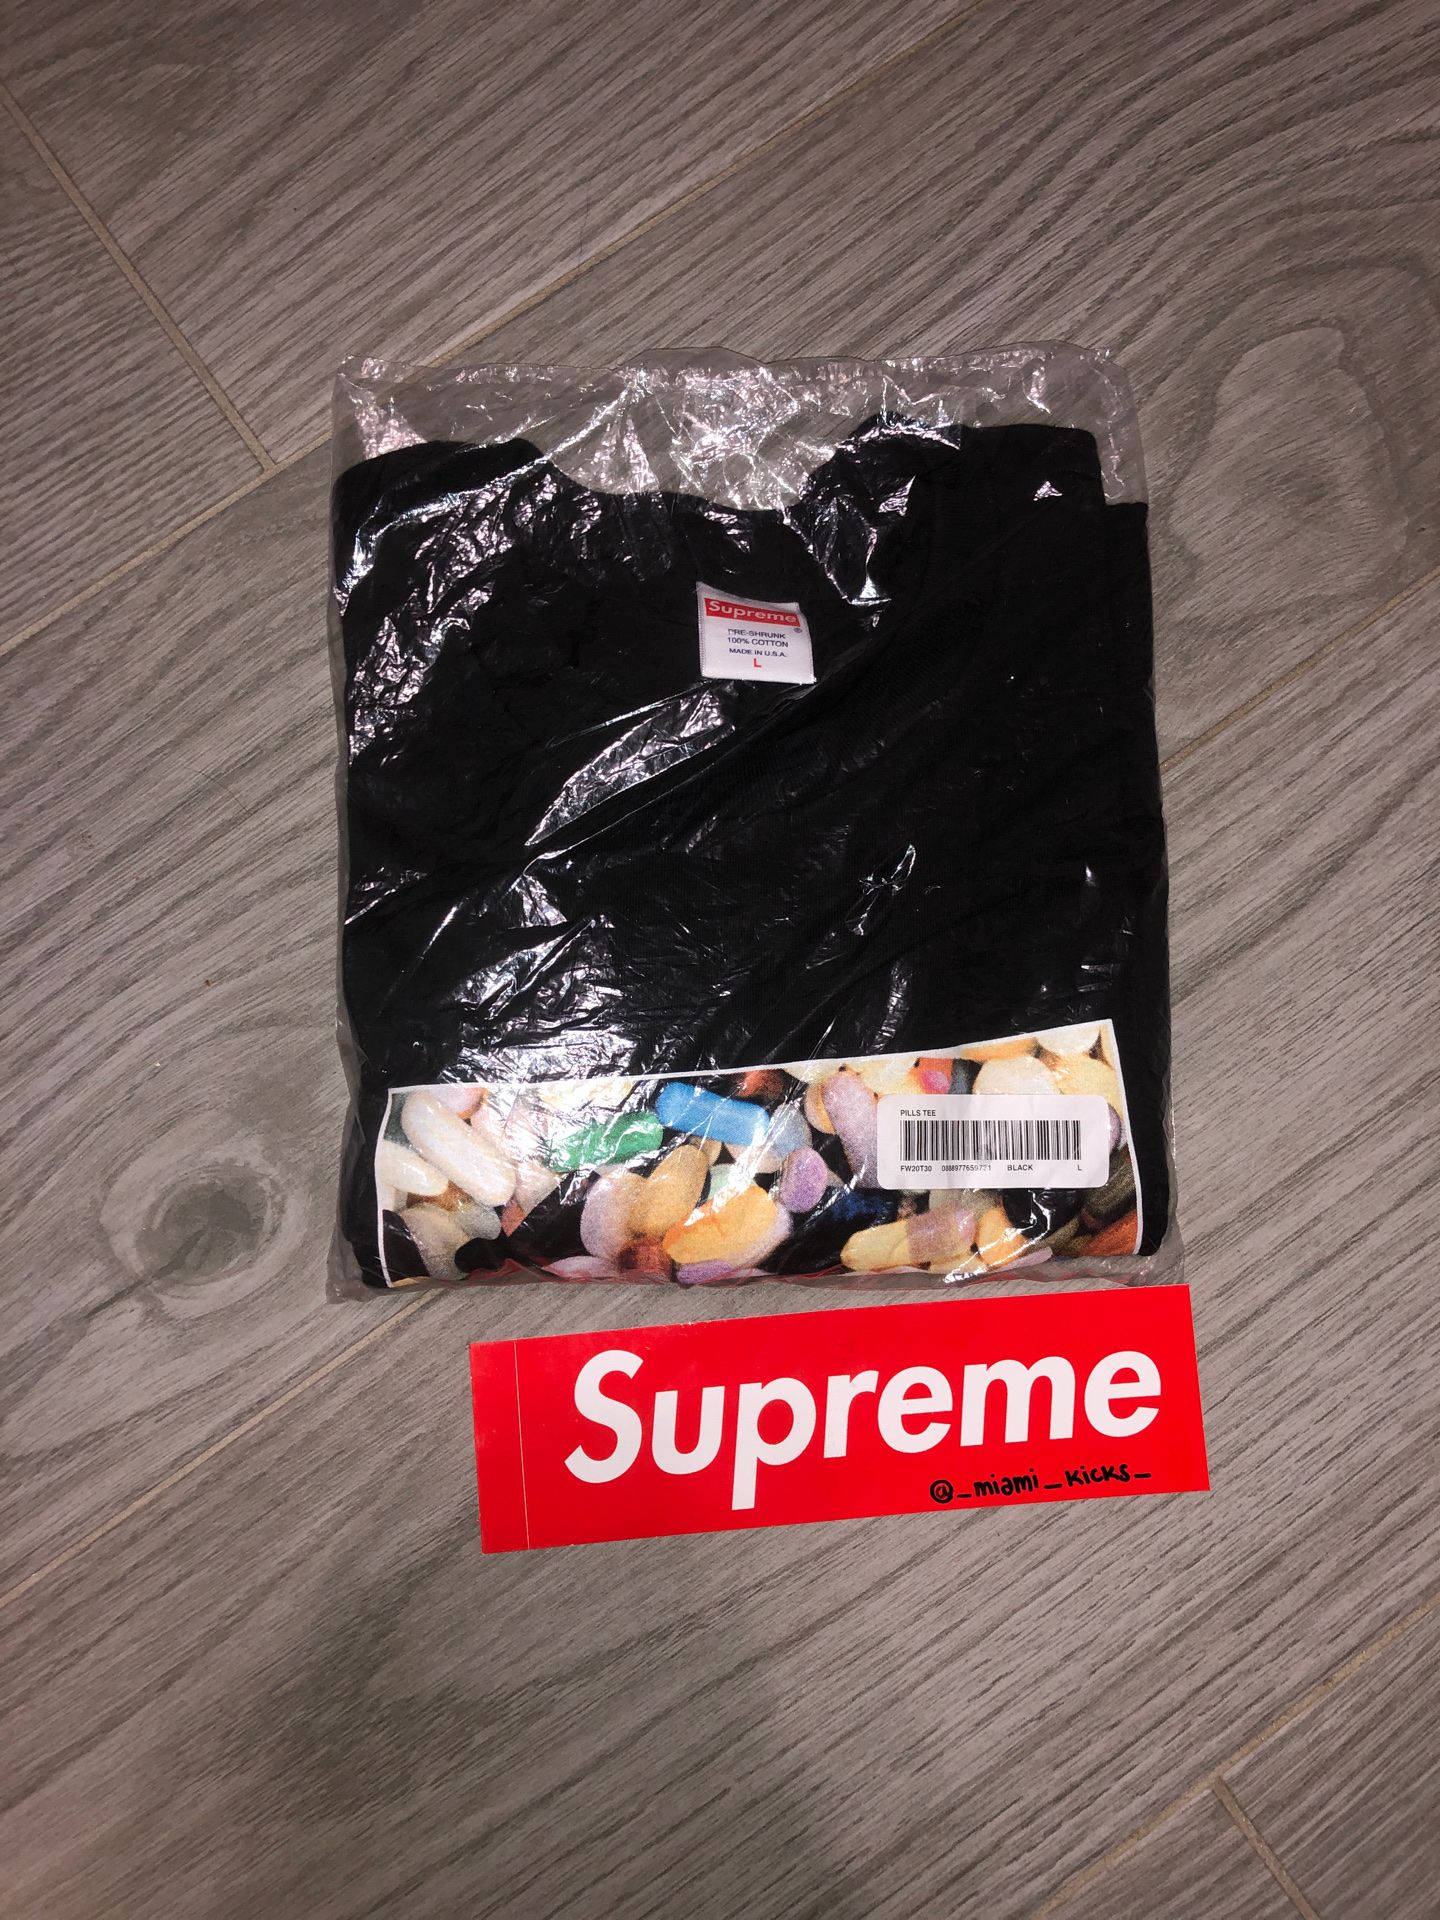 Supreme Pill tee get for a steal